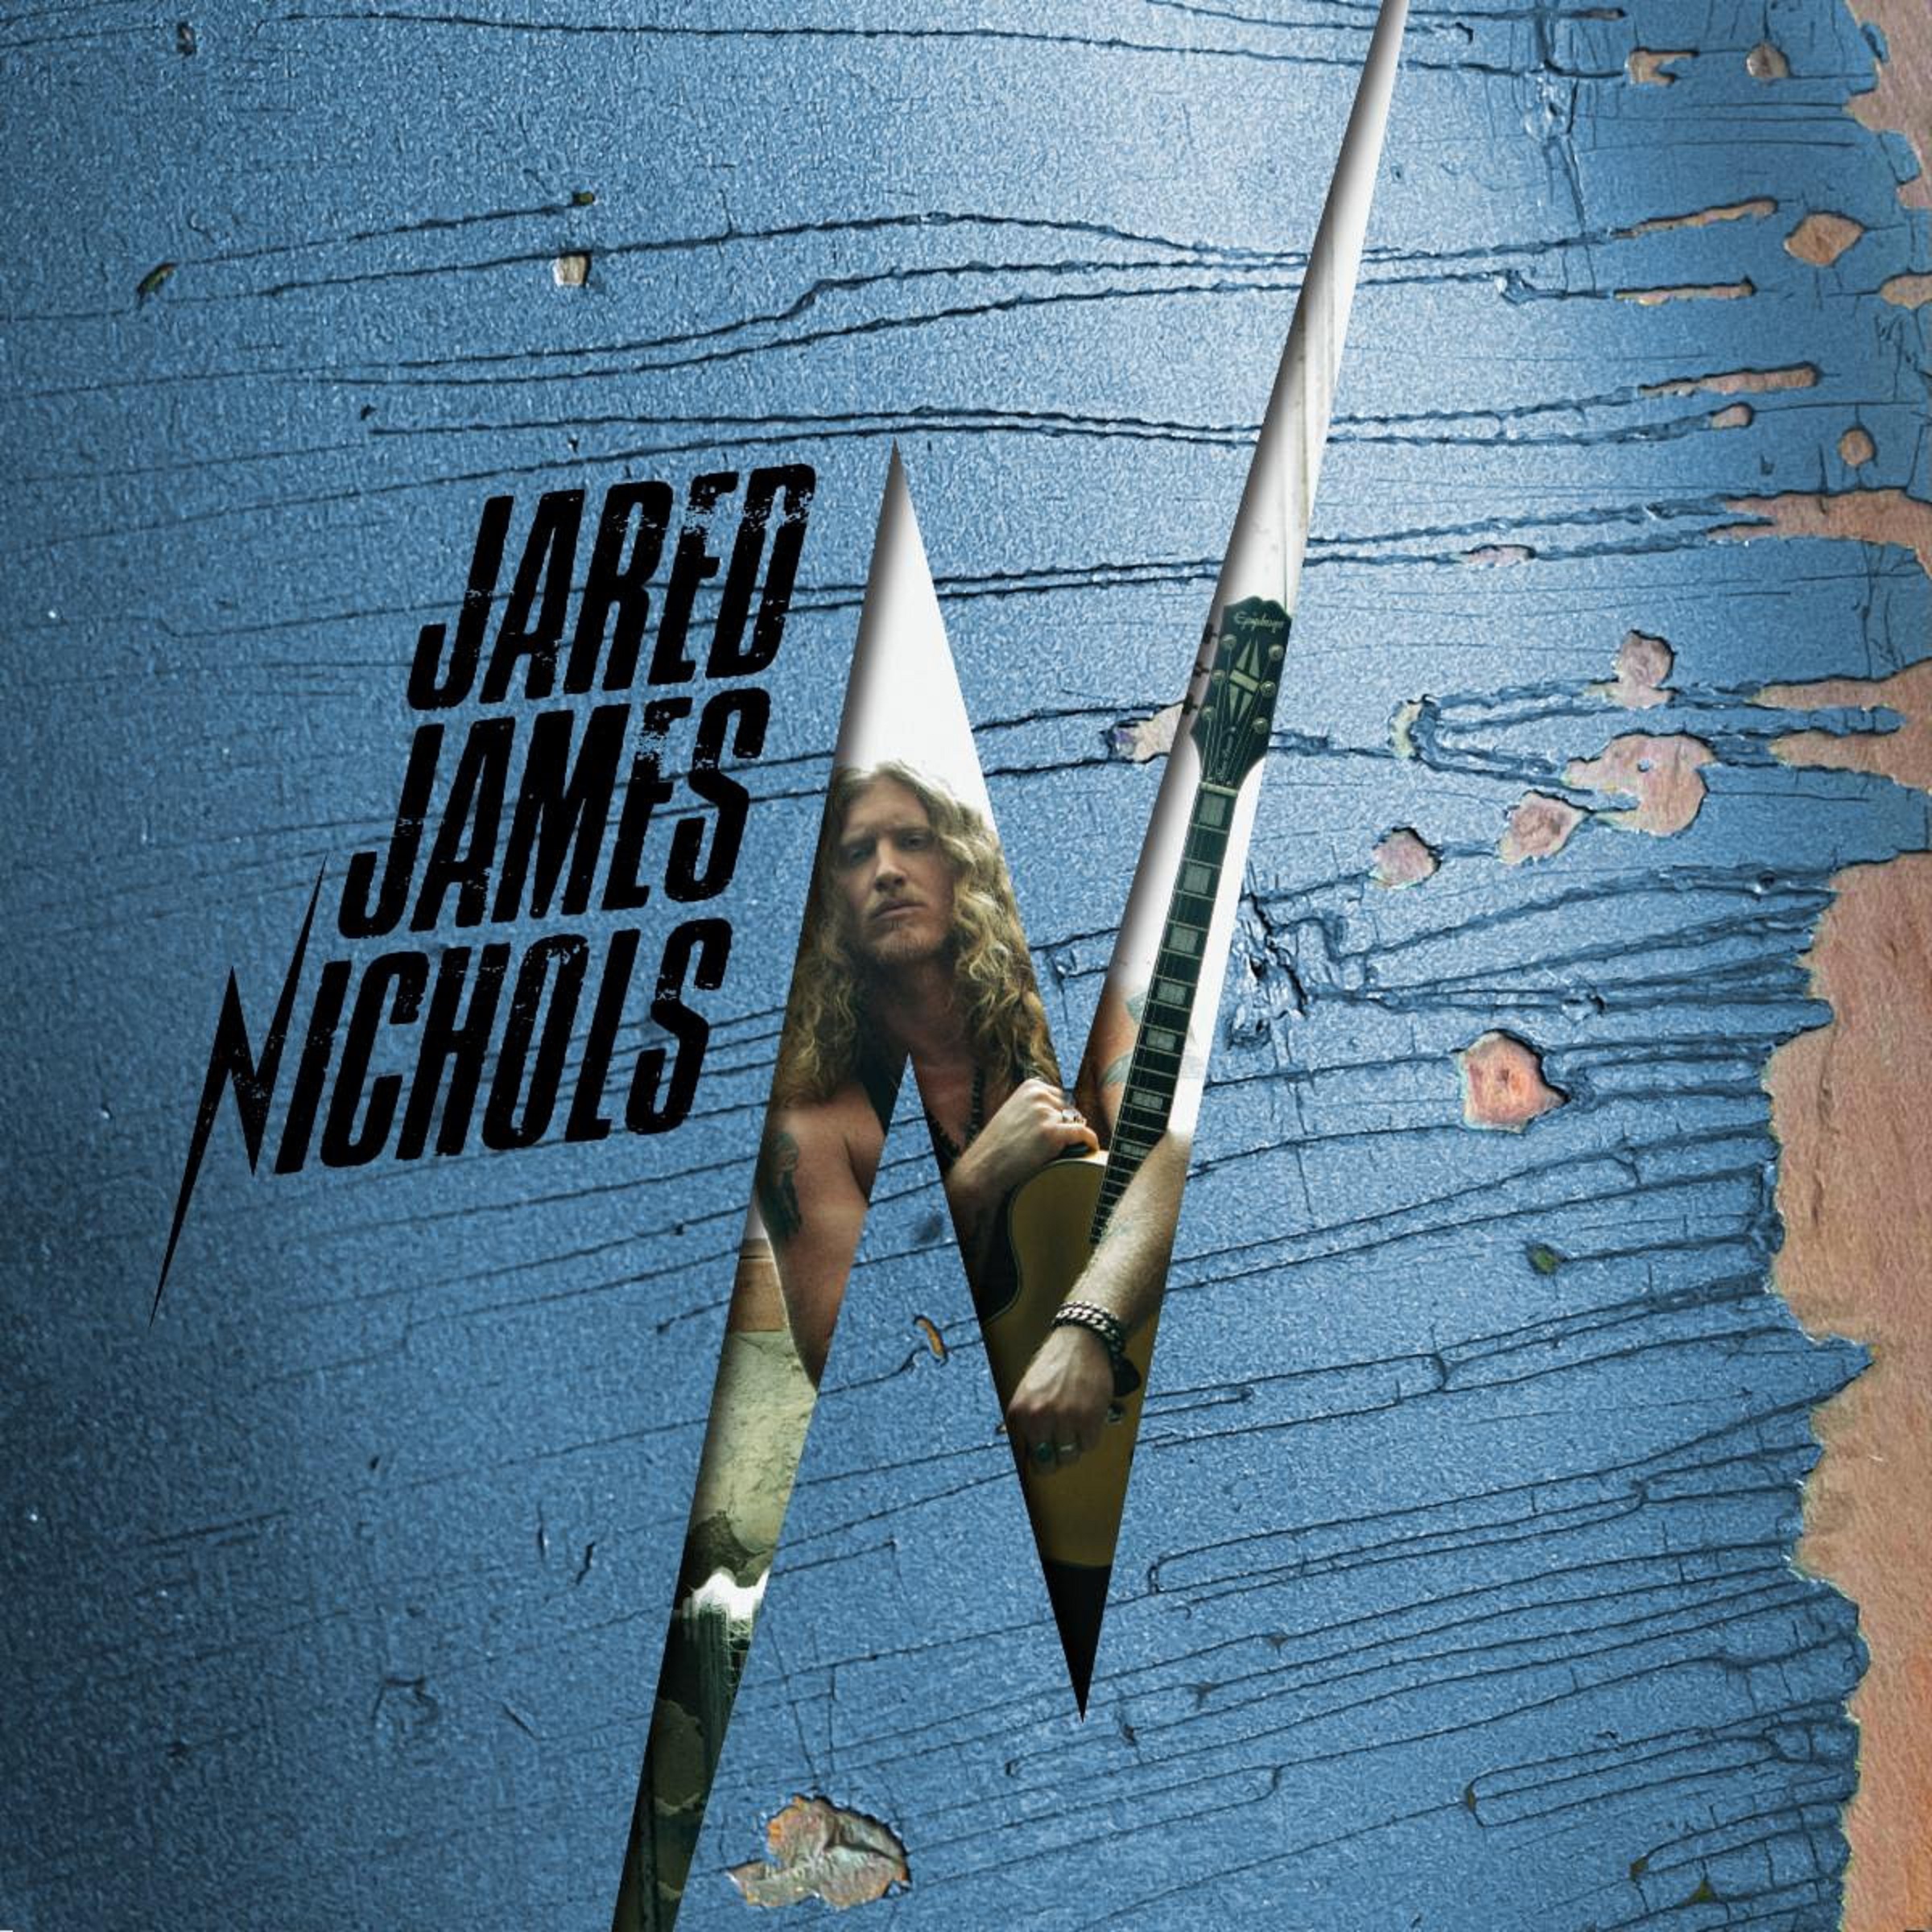 Jared James Nichols Self-Titled New Album Out Now